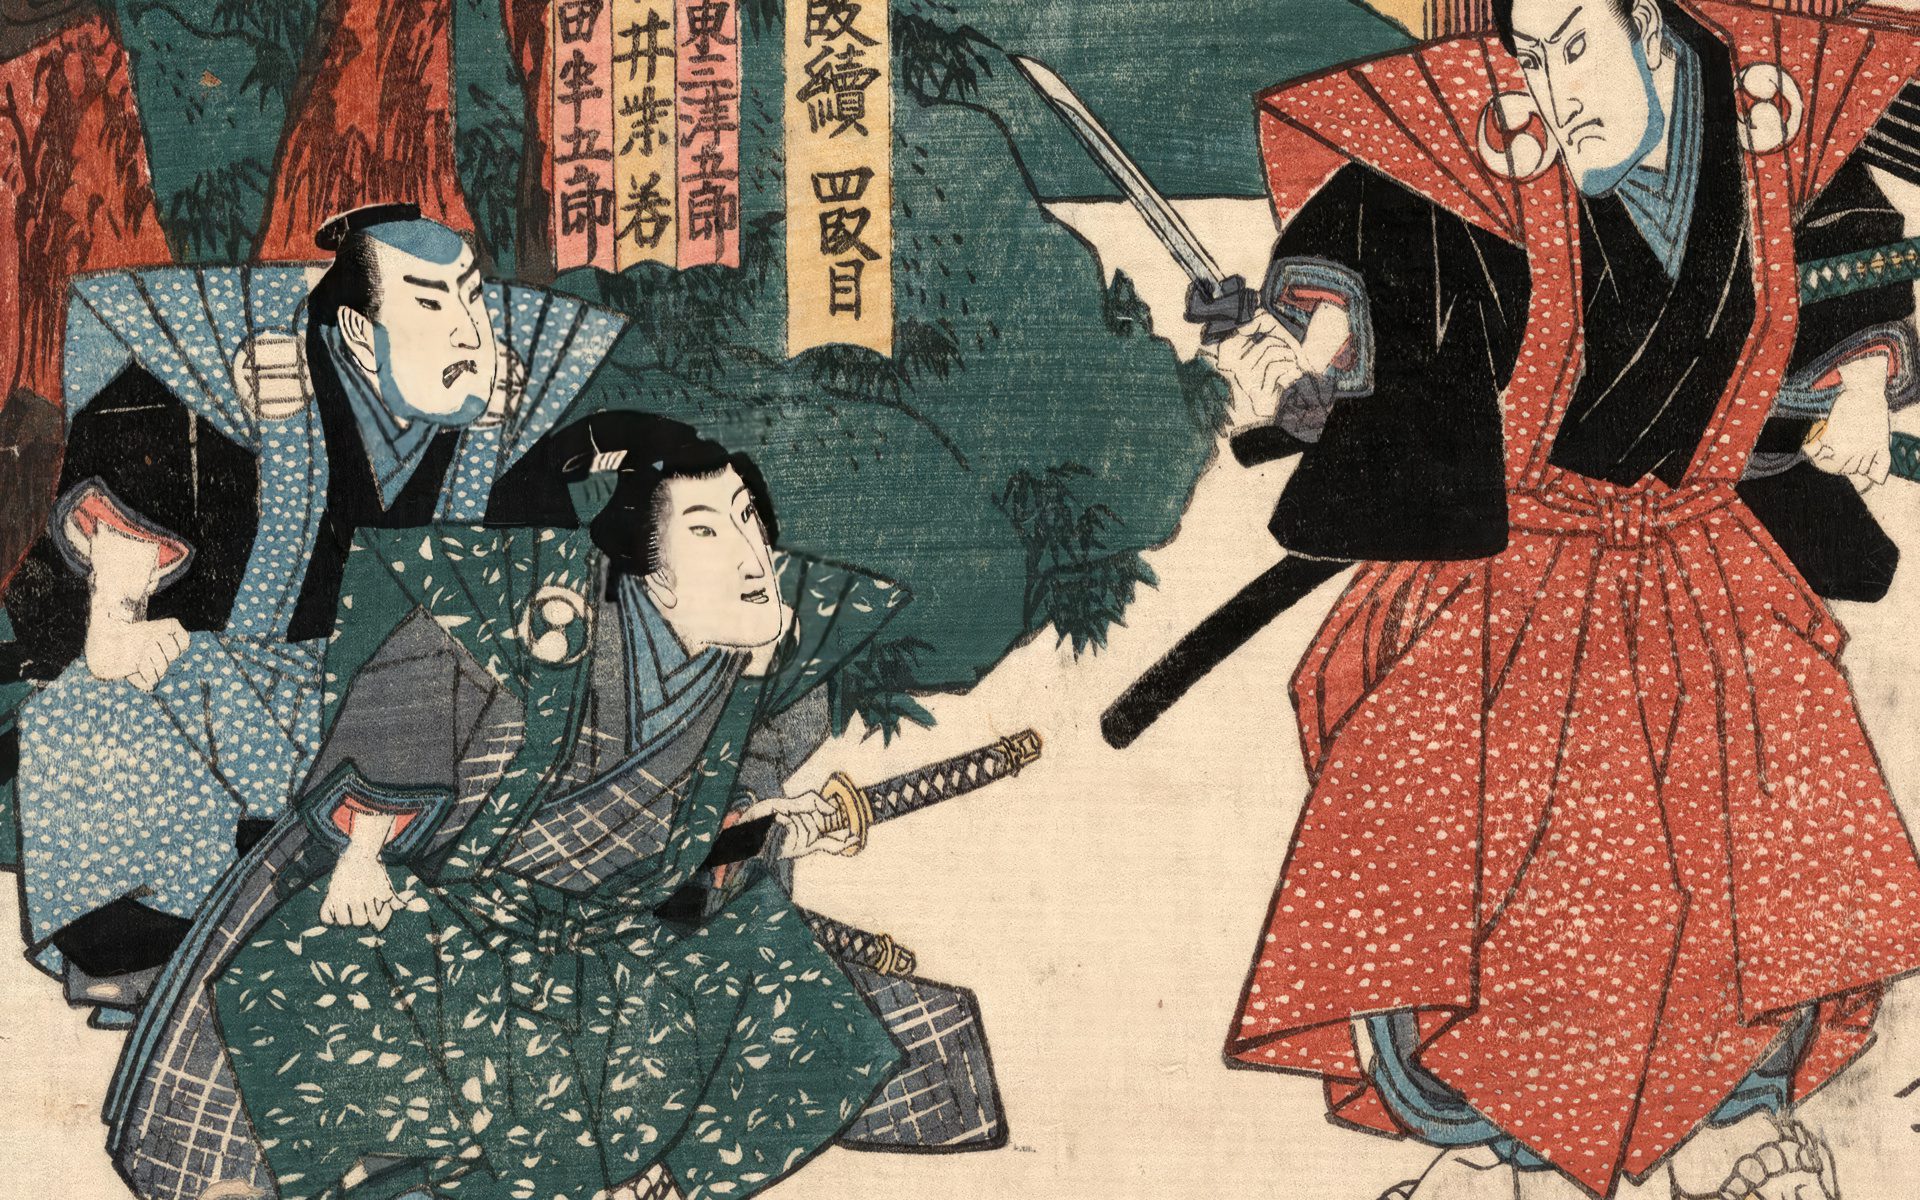 Learning the History of Seppuku: A Samurai’s Philosophy of Ritual Suicide